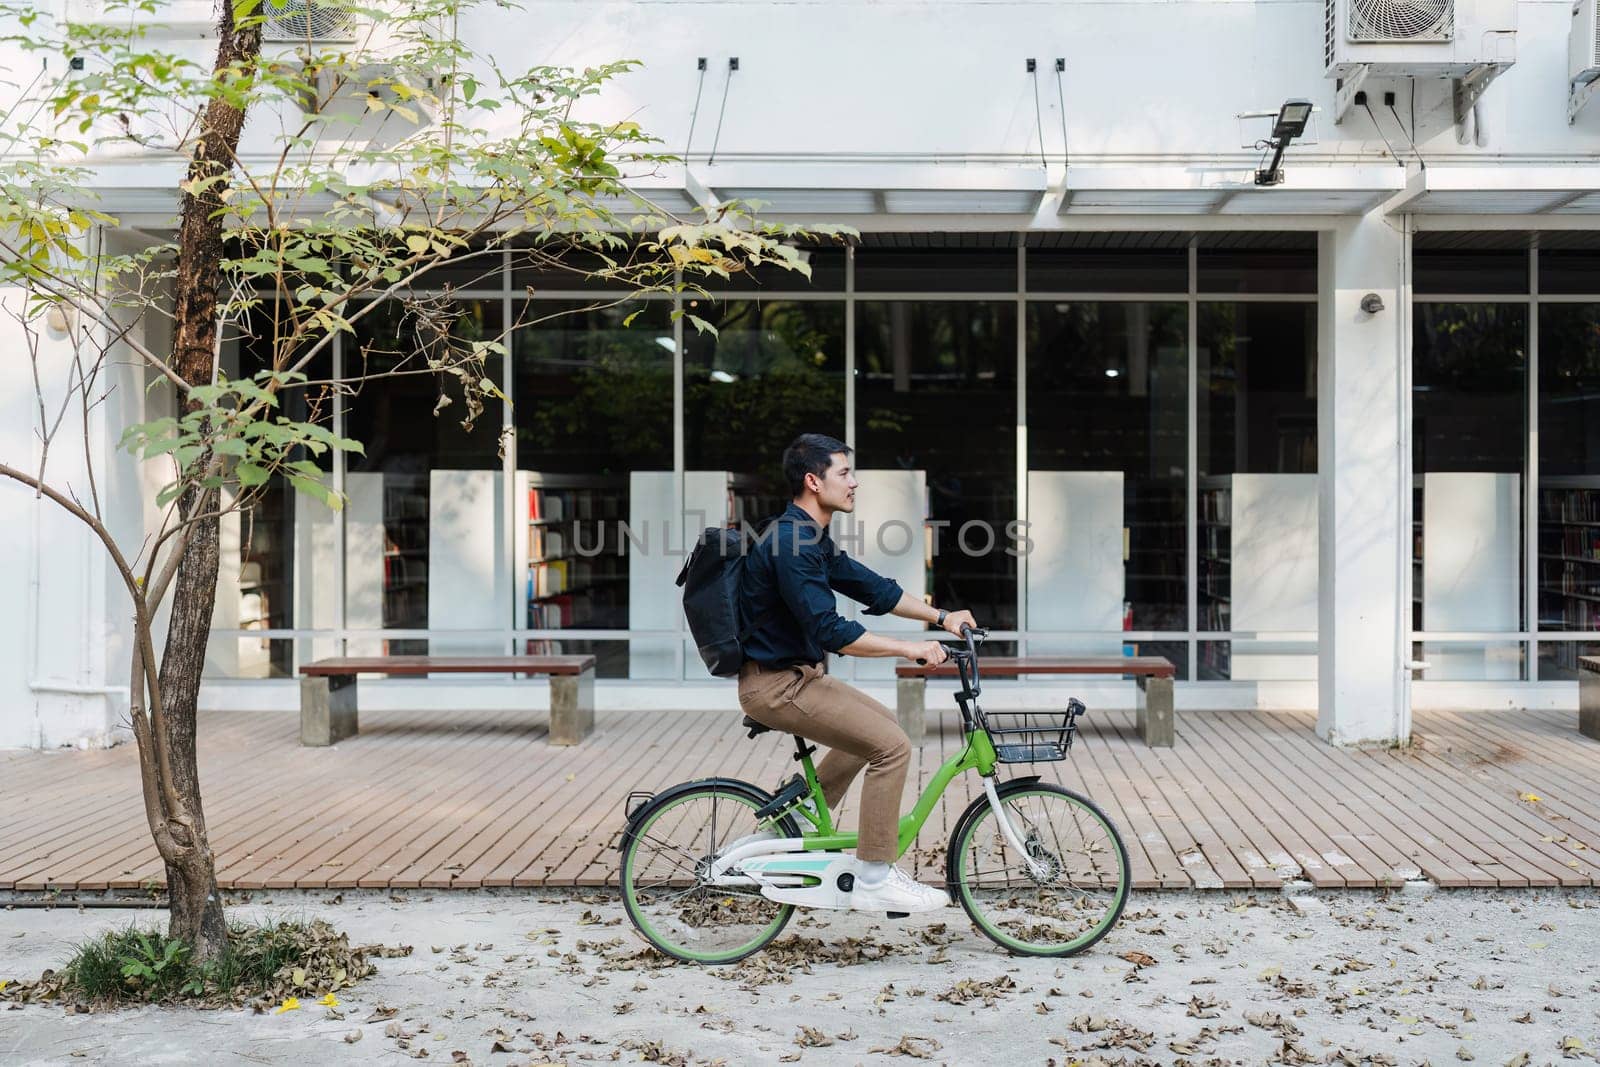 A man rides a bicycle down a sidewalk in front of a building with a lot of books. The man is wearing a backpack and a blue shirt. The scene is peaceful and calm, with the man enjoying his ride